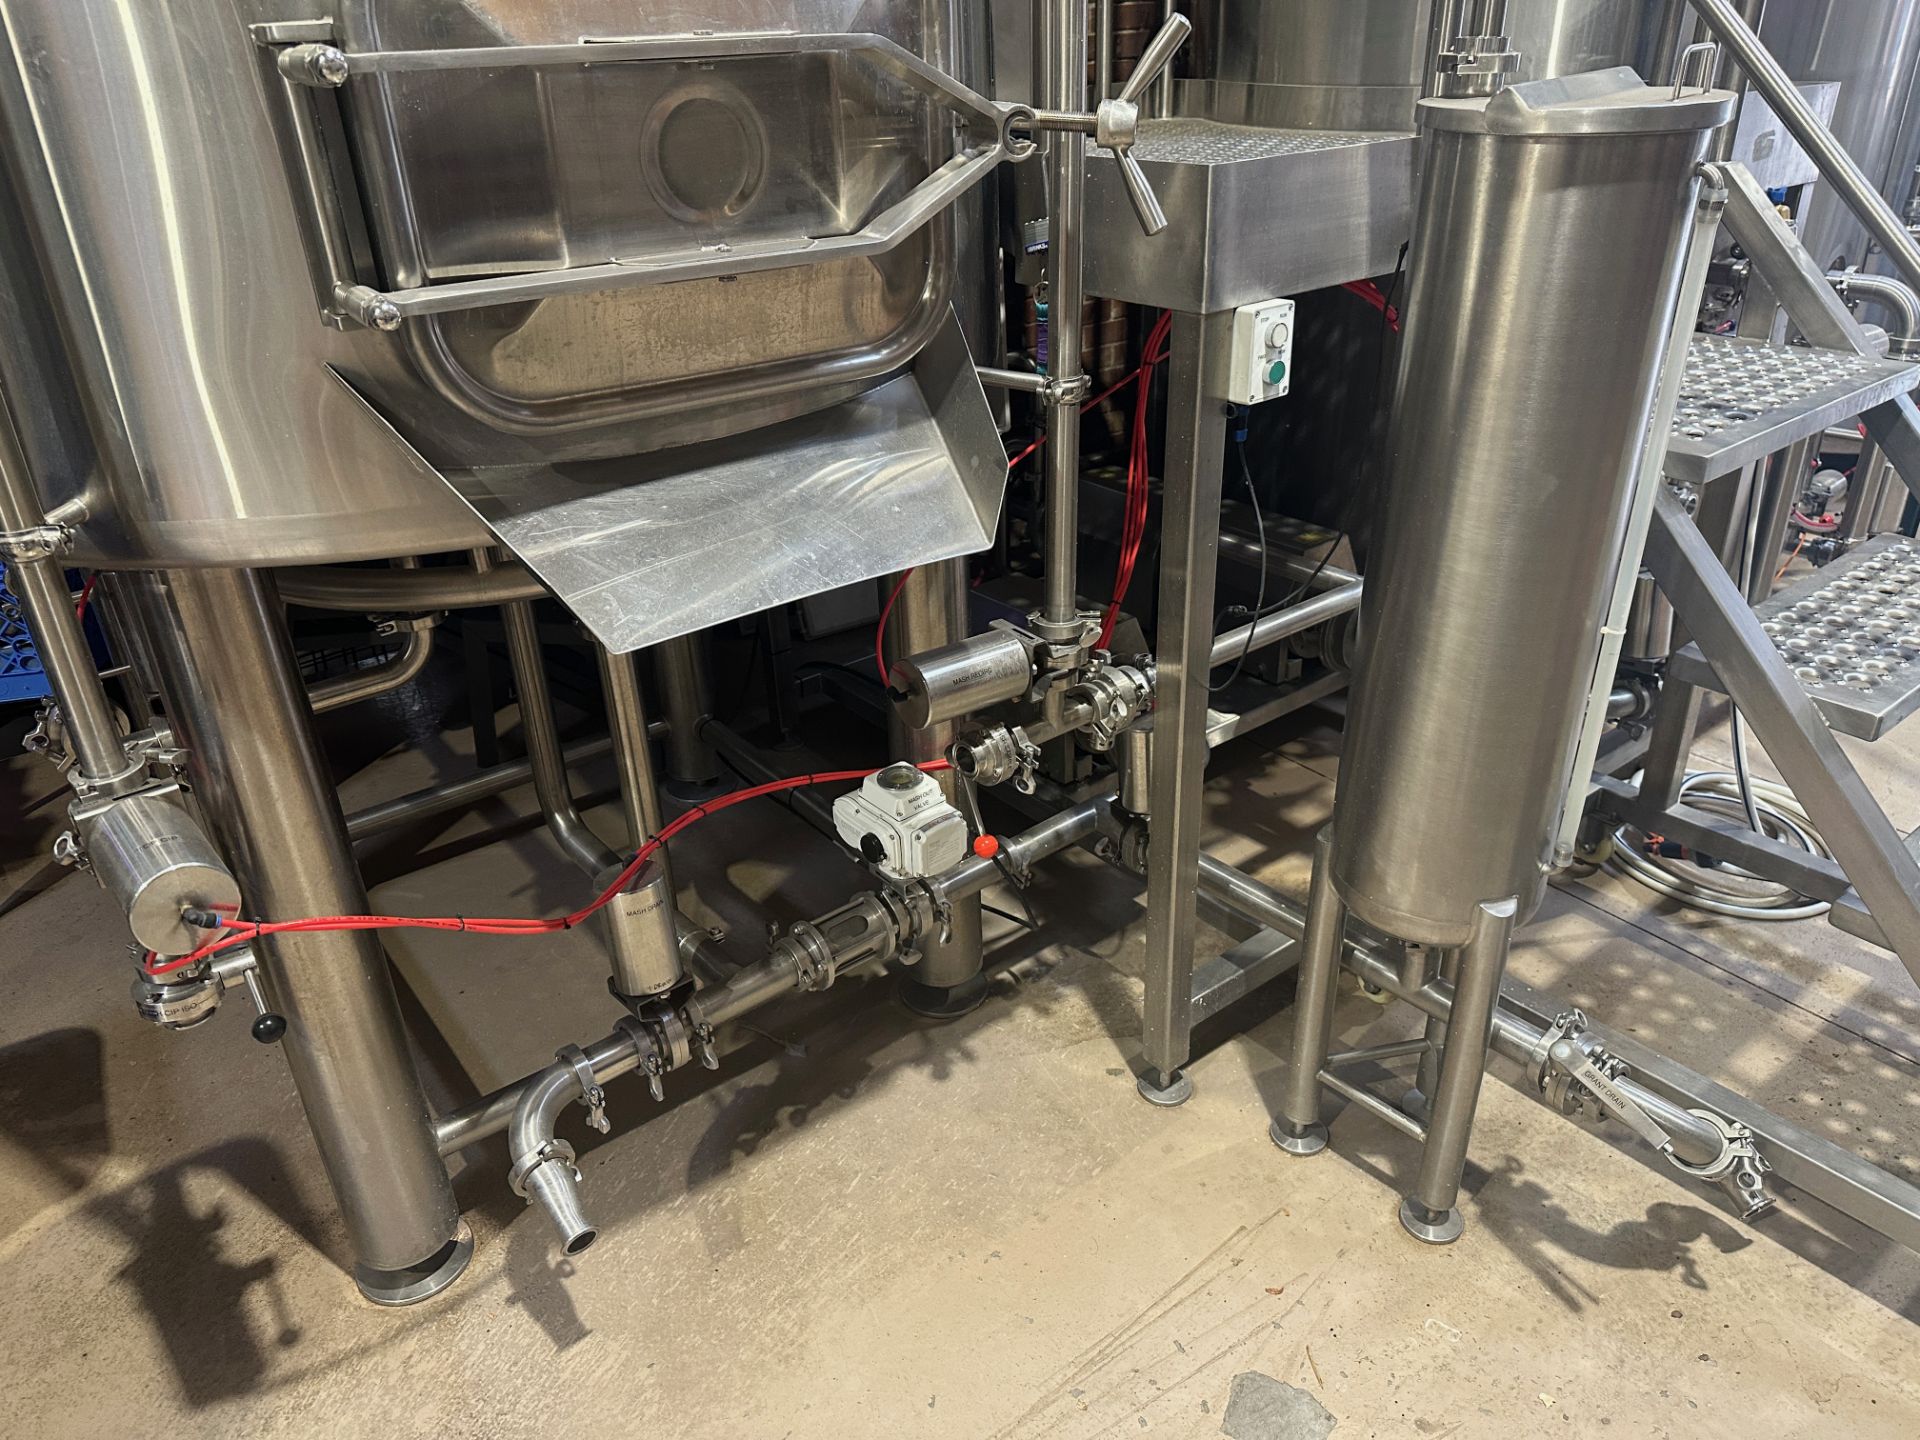 2019 ABS 10 BBL 2-Vessel Brewhouse with Grist Case - Mash/Lauter Tun (Approx. 5' Di | Rig Fee $4500 - Image 19 of 24